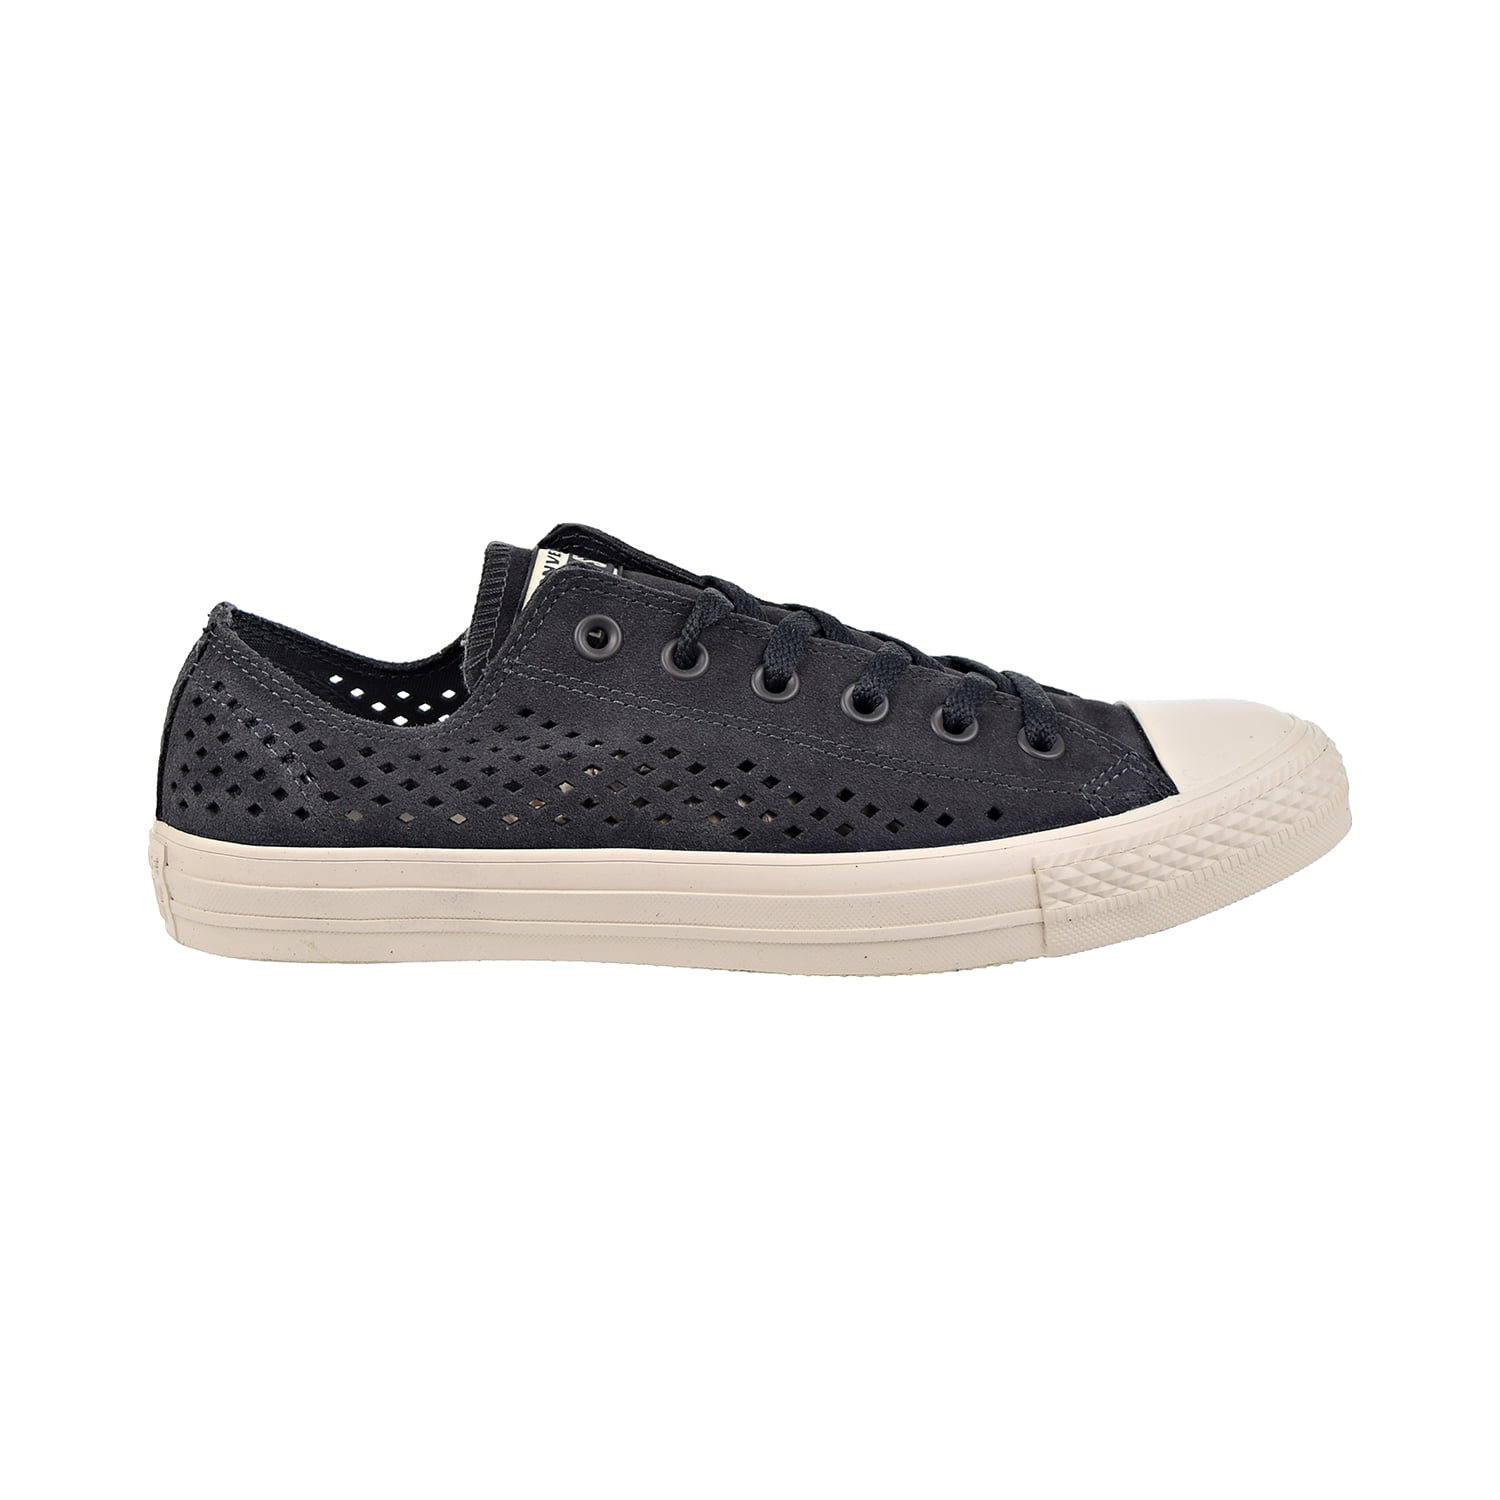 converse men's chuck taylor all star ox sneakers